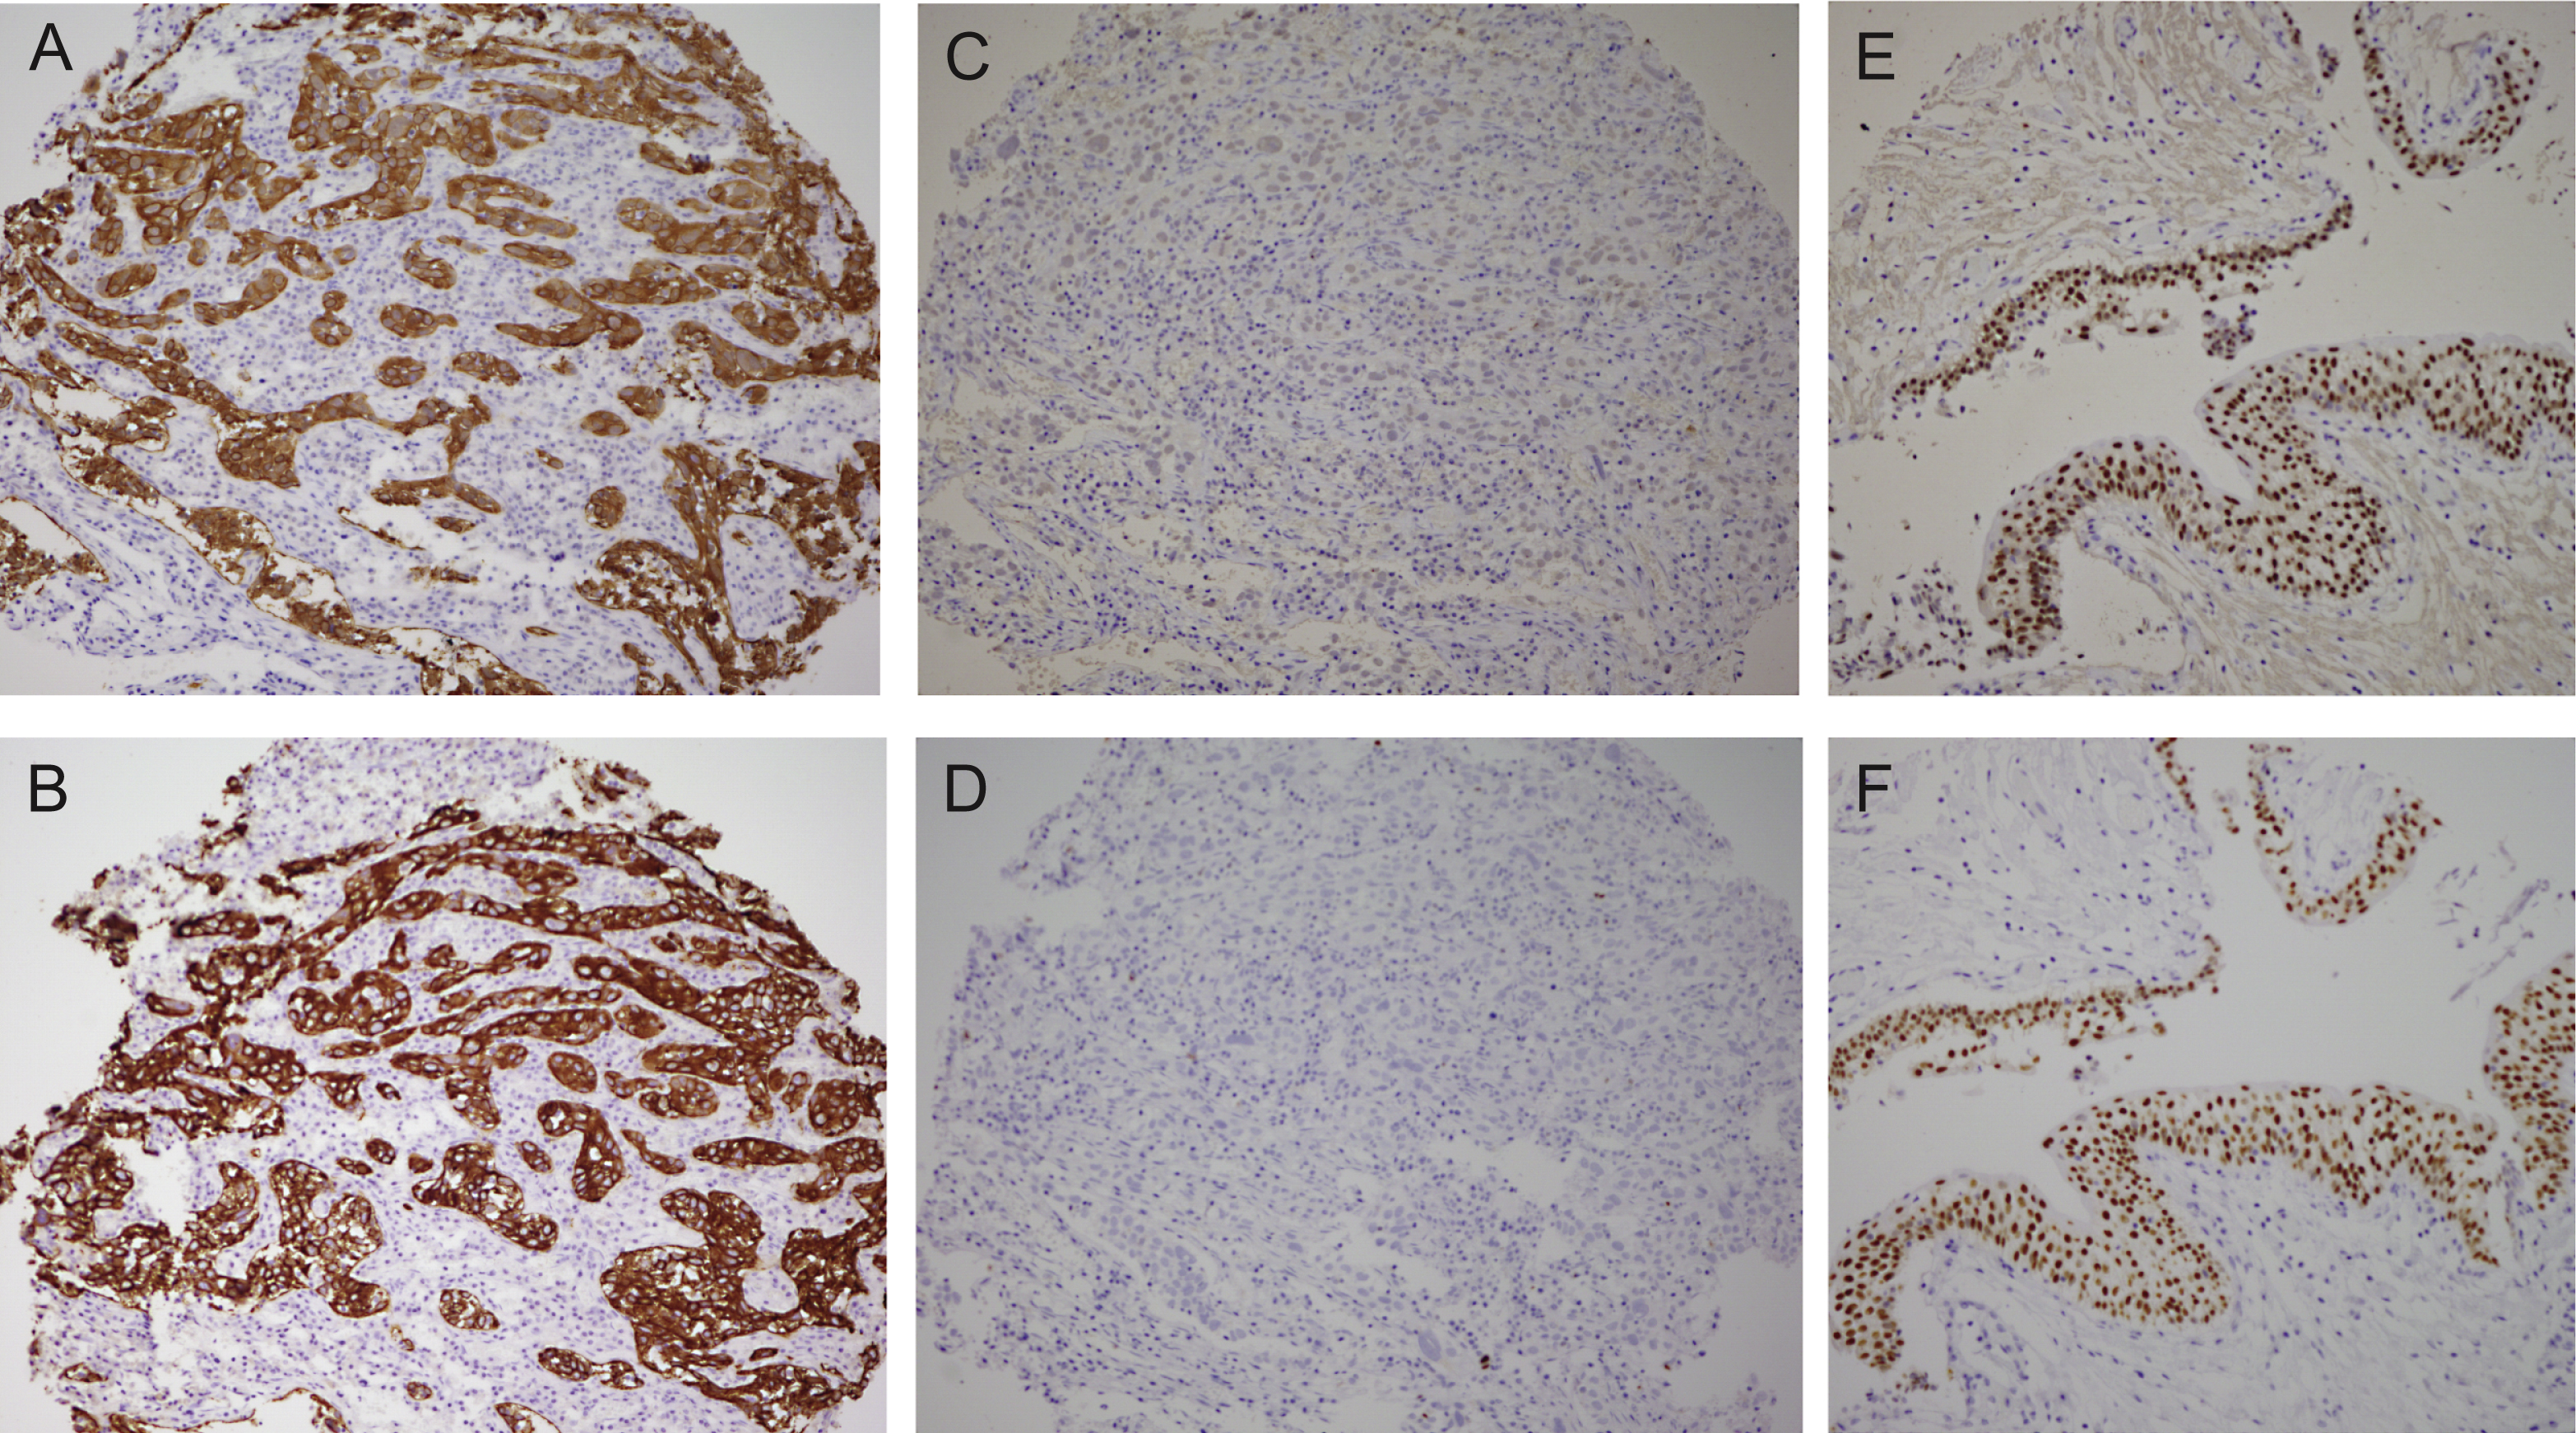 
Basal/Squamous-like (BASQ) tumors are characterized by strong expression of KRT5/6 (A) and KRT14 (B) and low or undetectable expression of FOXA1 (C) and GATA3 (D). By contrast to them, normal urothelial cells display strong expression of FOXA1 (E) andGATA3 (F).